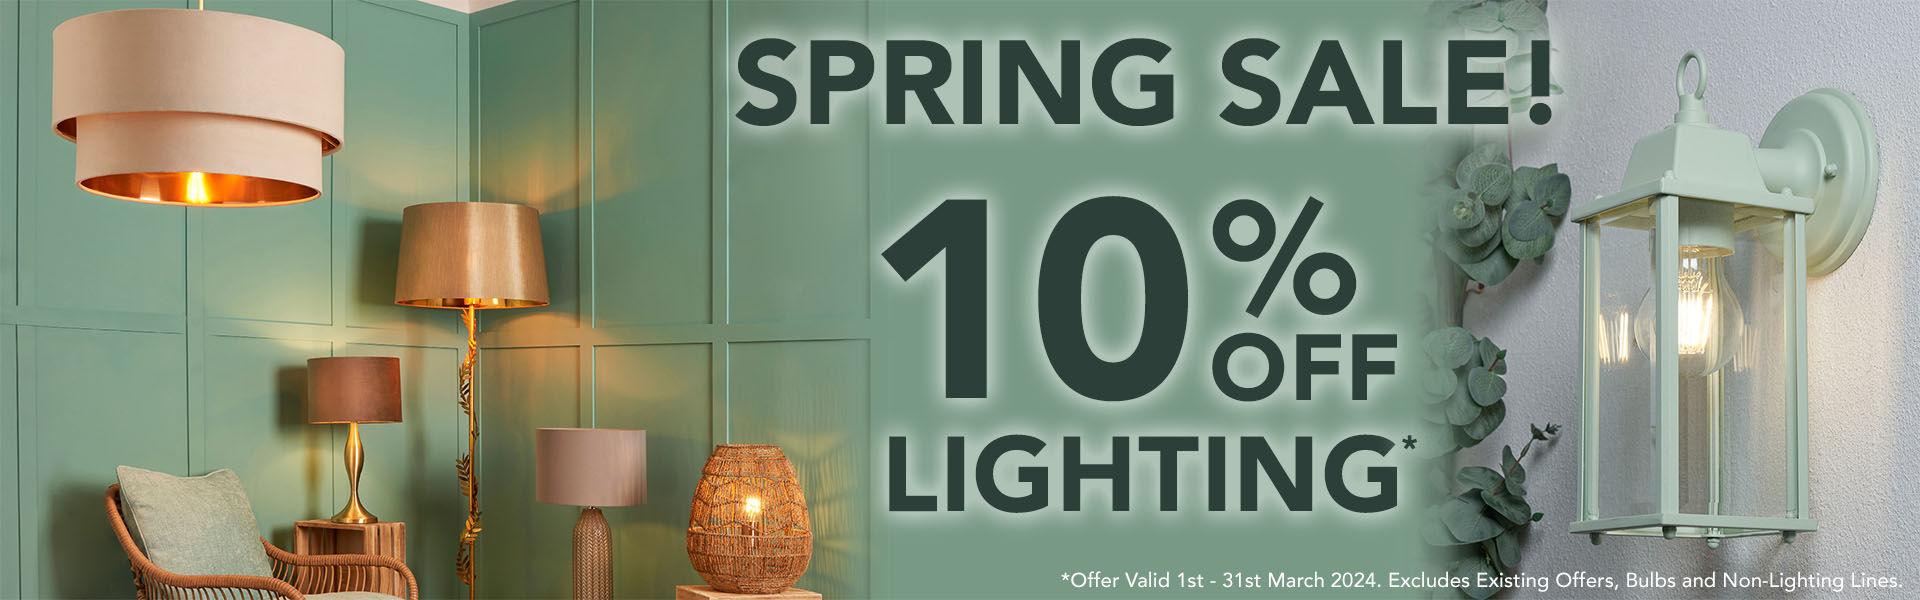 10% off Lighting. Excludes Bulbs, Existnig Offers and Non-Lighting Lines. Valid March 1st to 31st 2024.